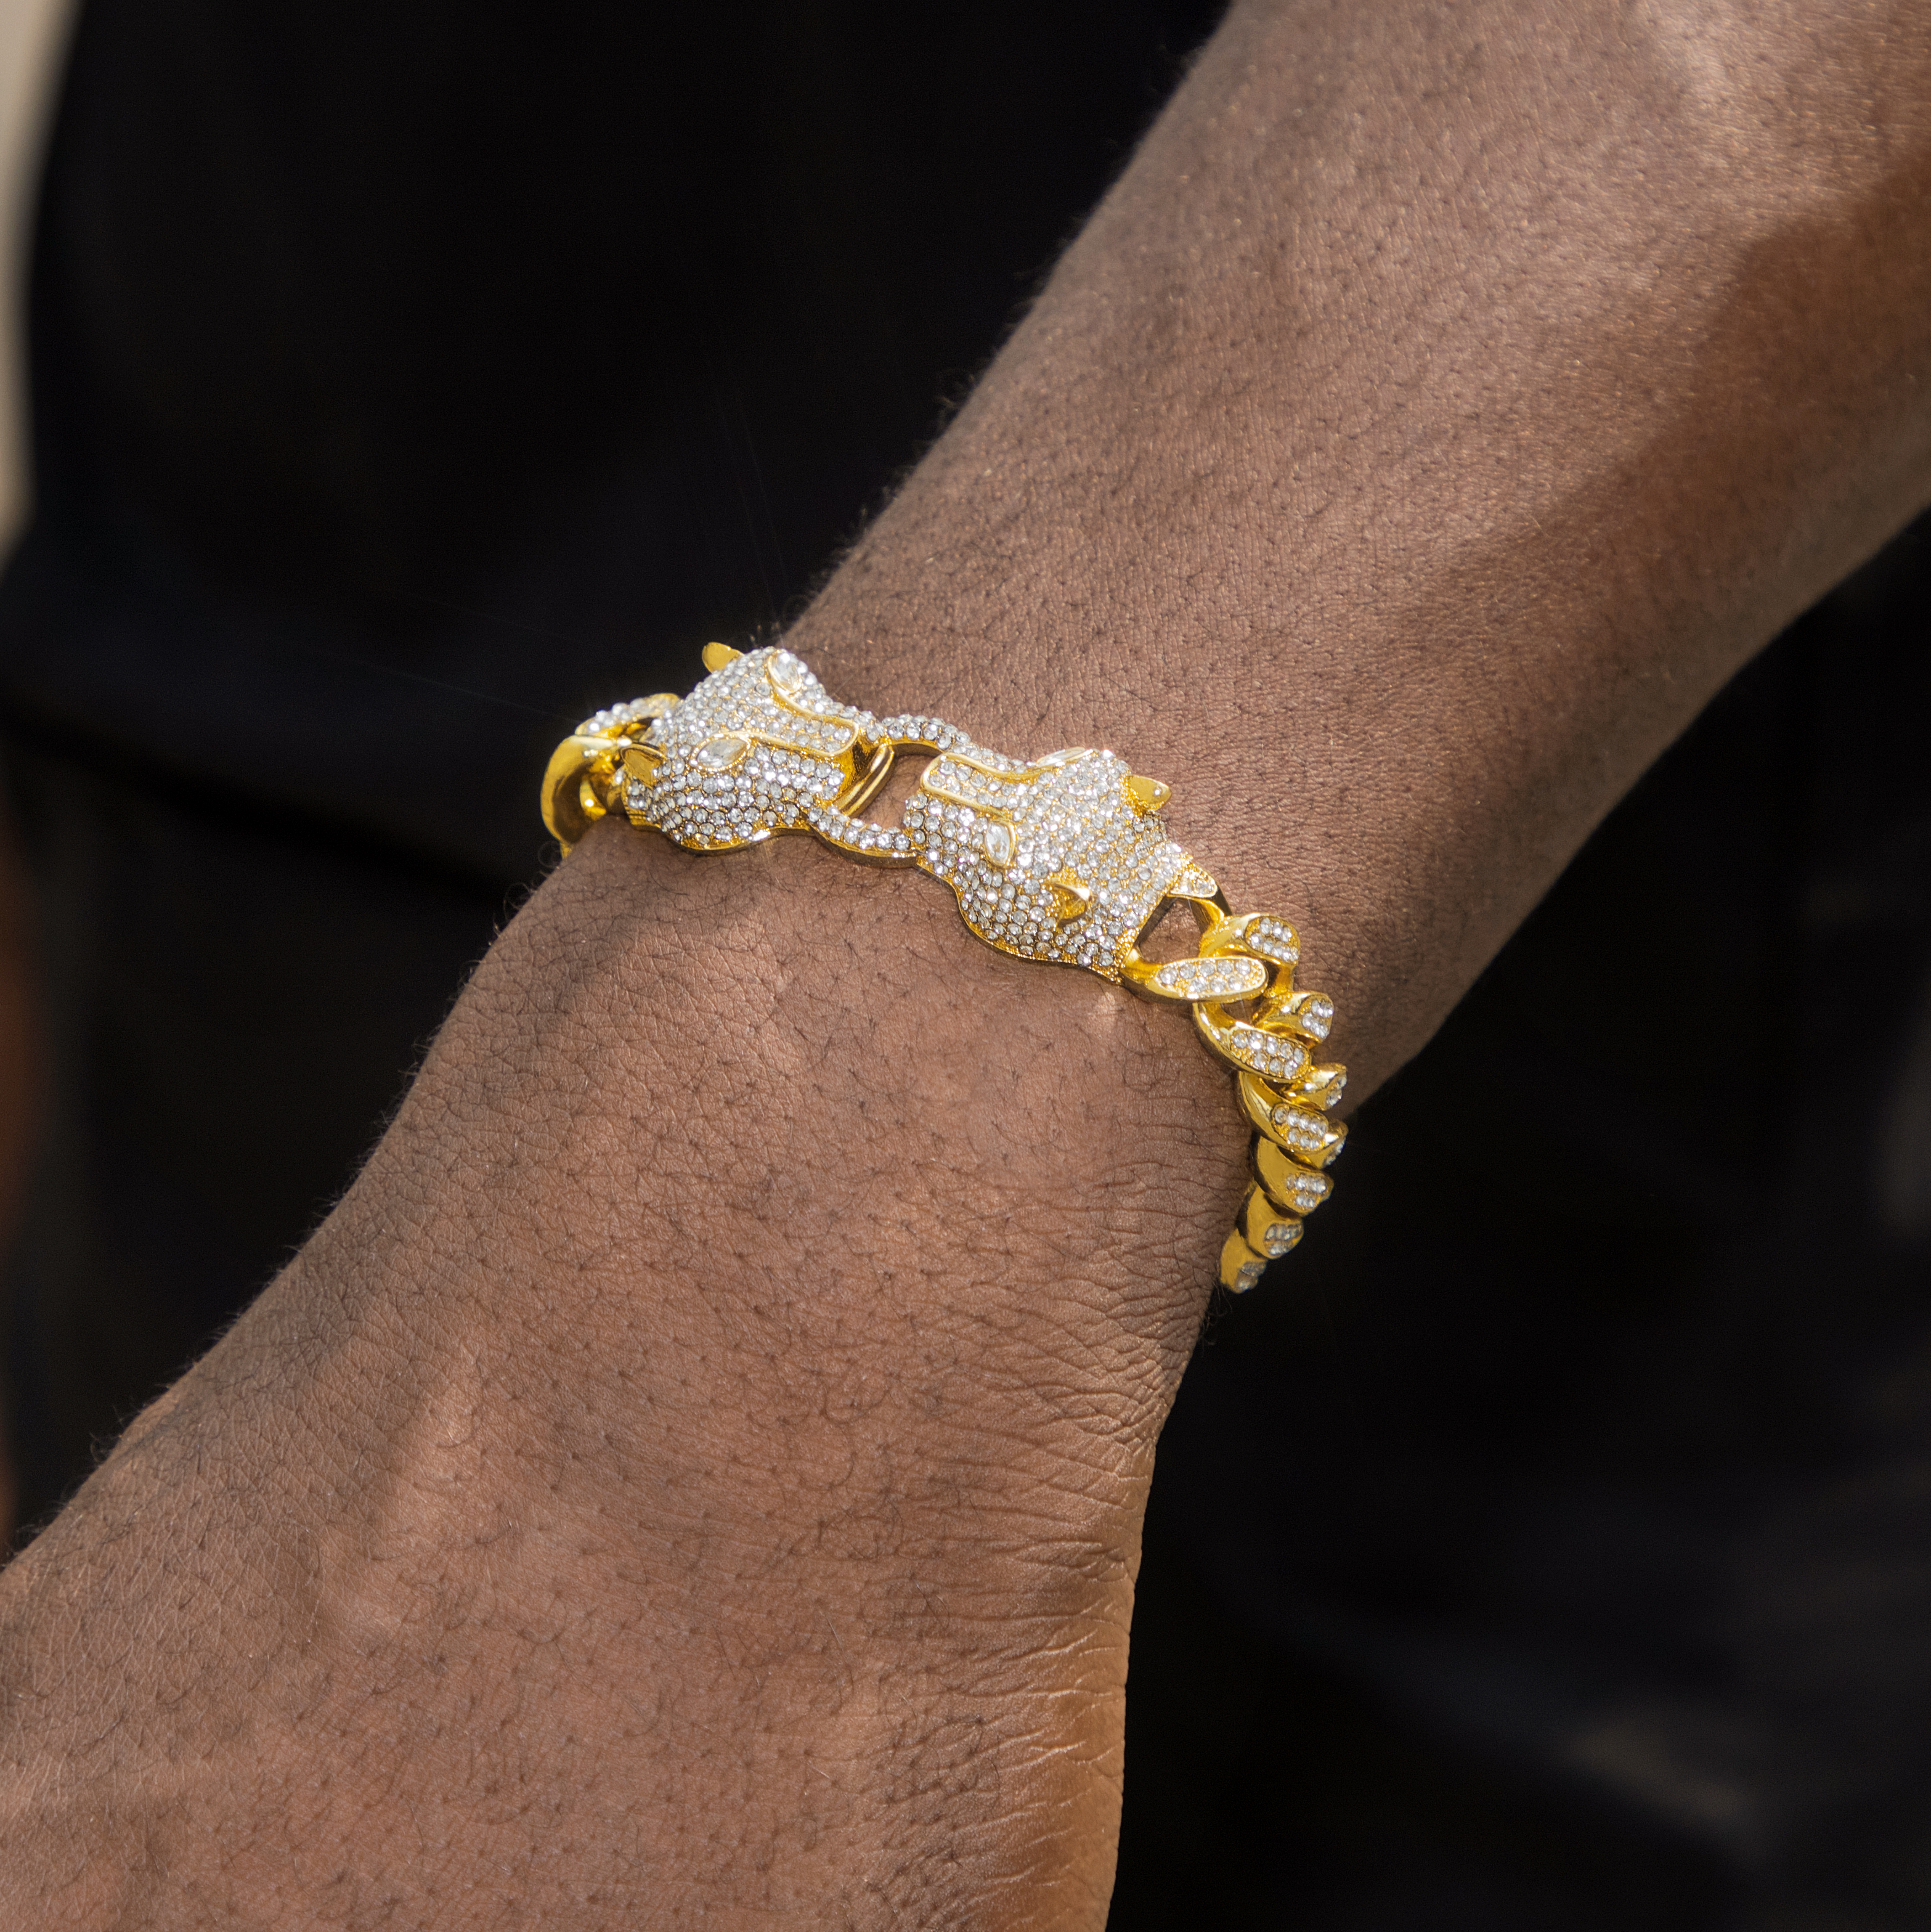 Iced Double Panther Cuban Bracelet in 18K Gold